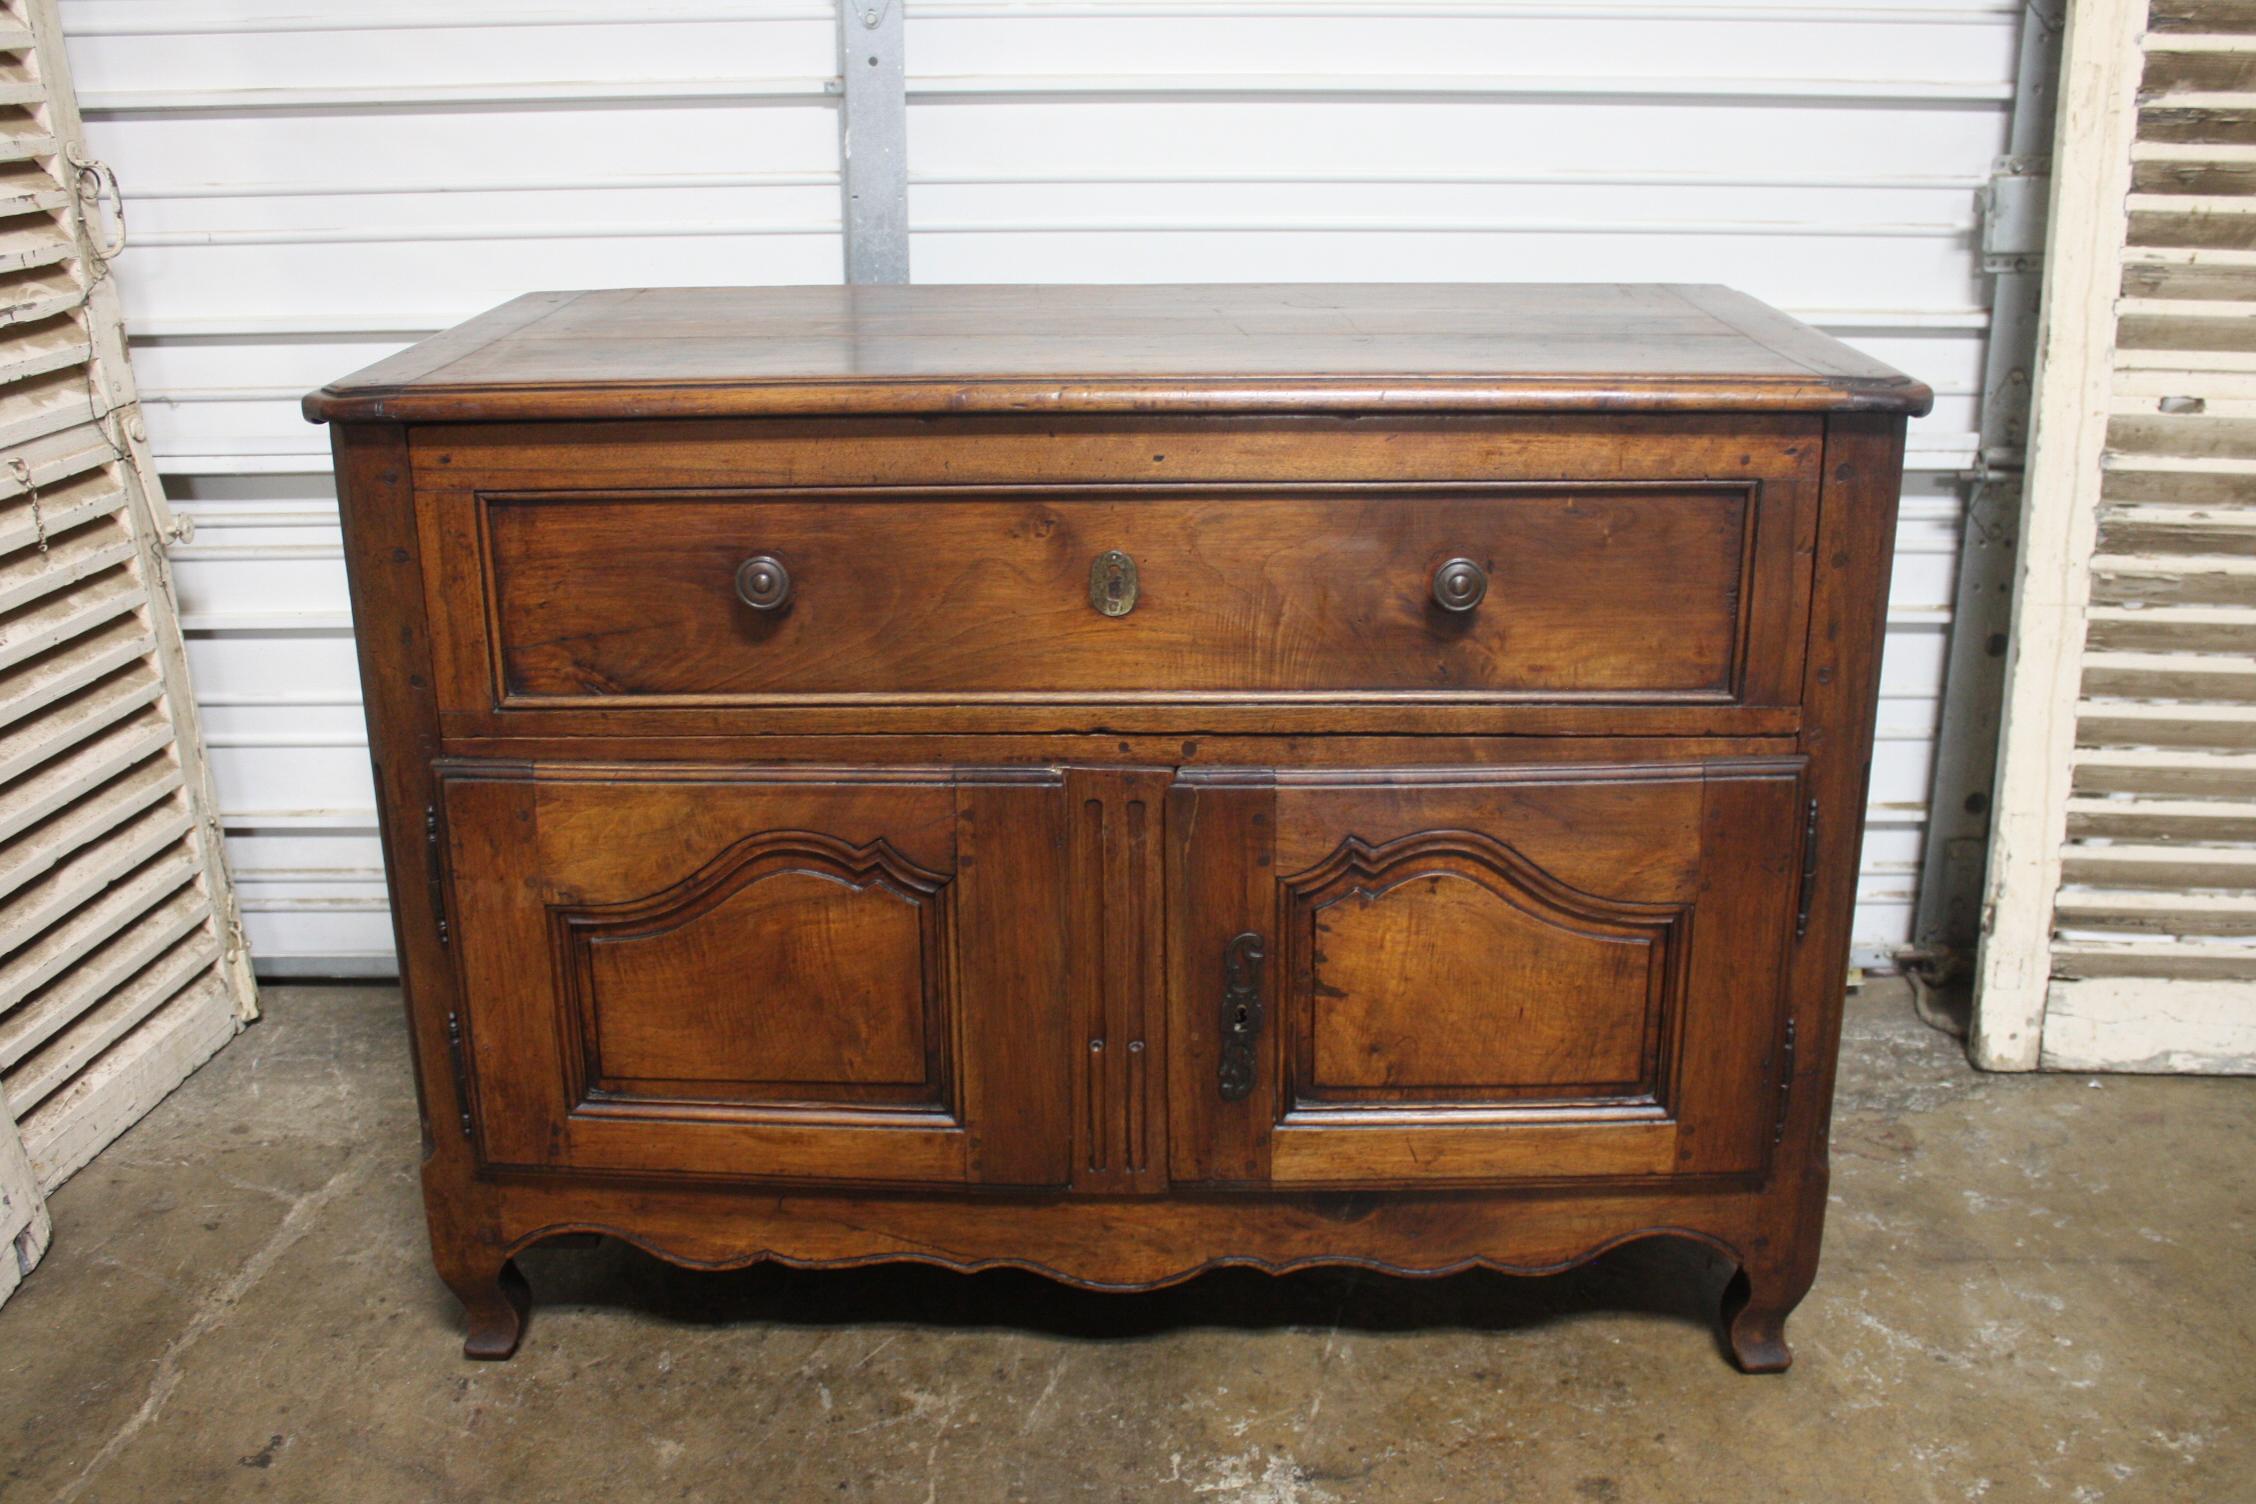 This rustic buffet is different, big drawer and small doors. Beautiful original patine and warm color.